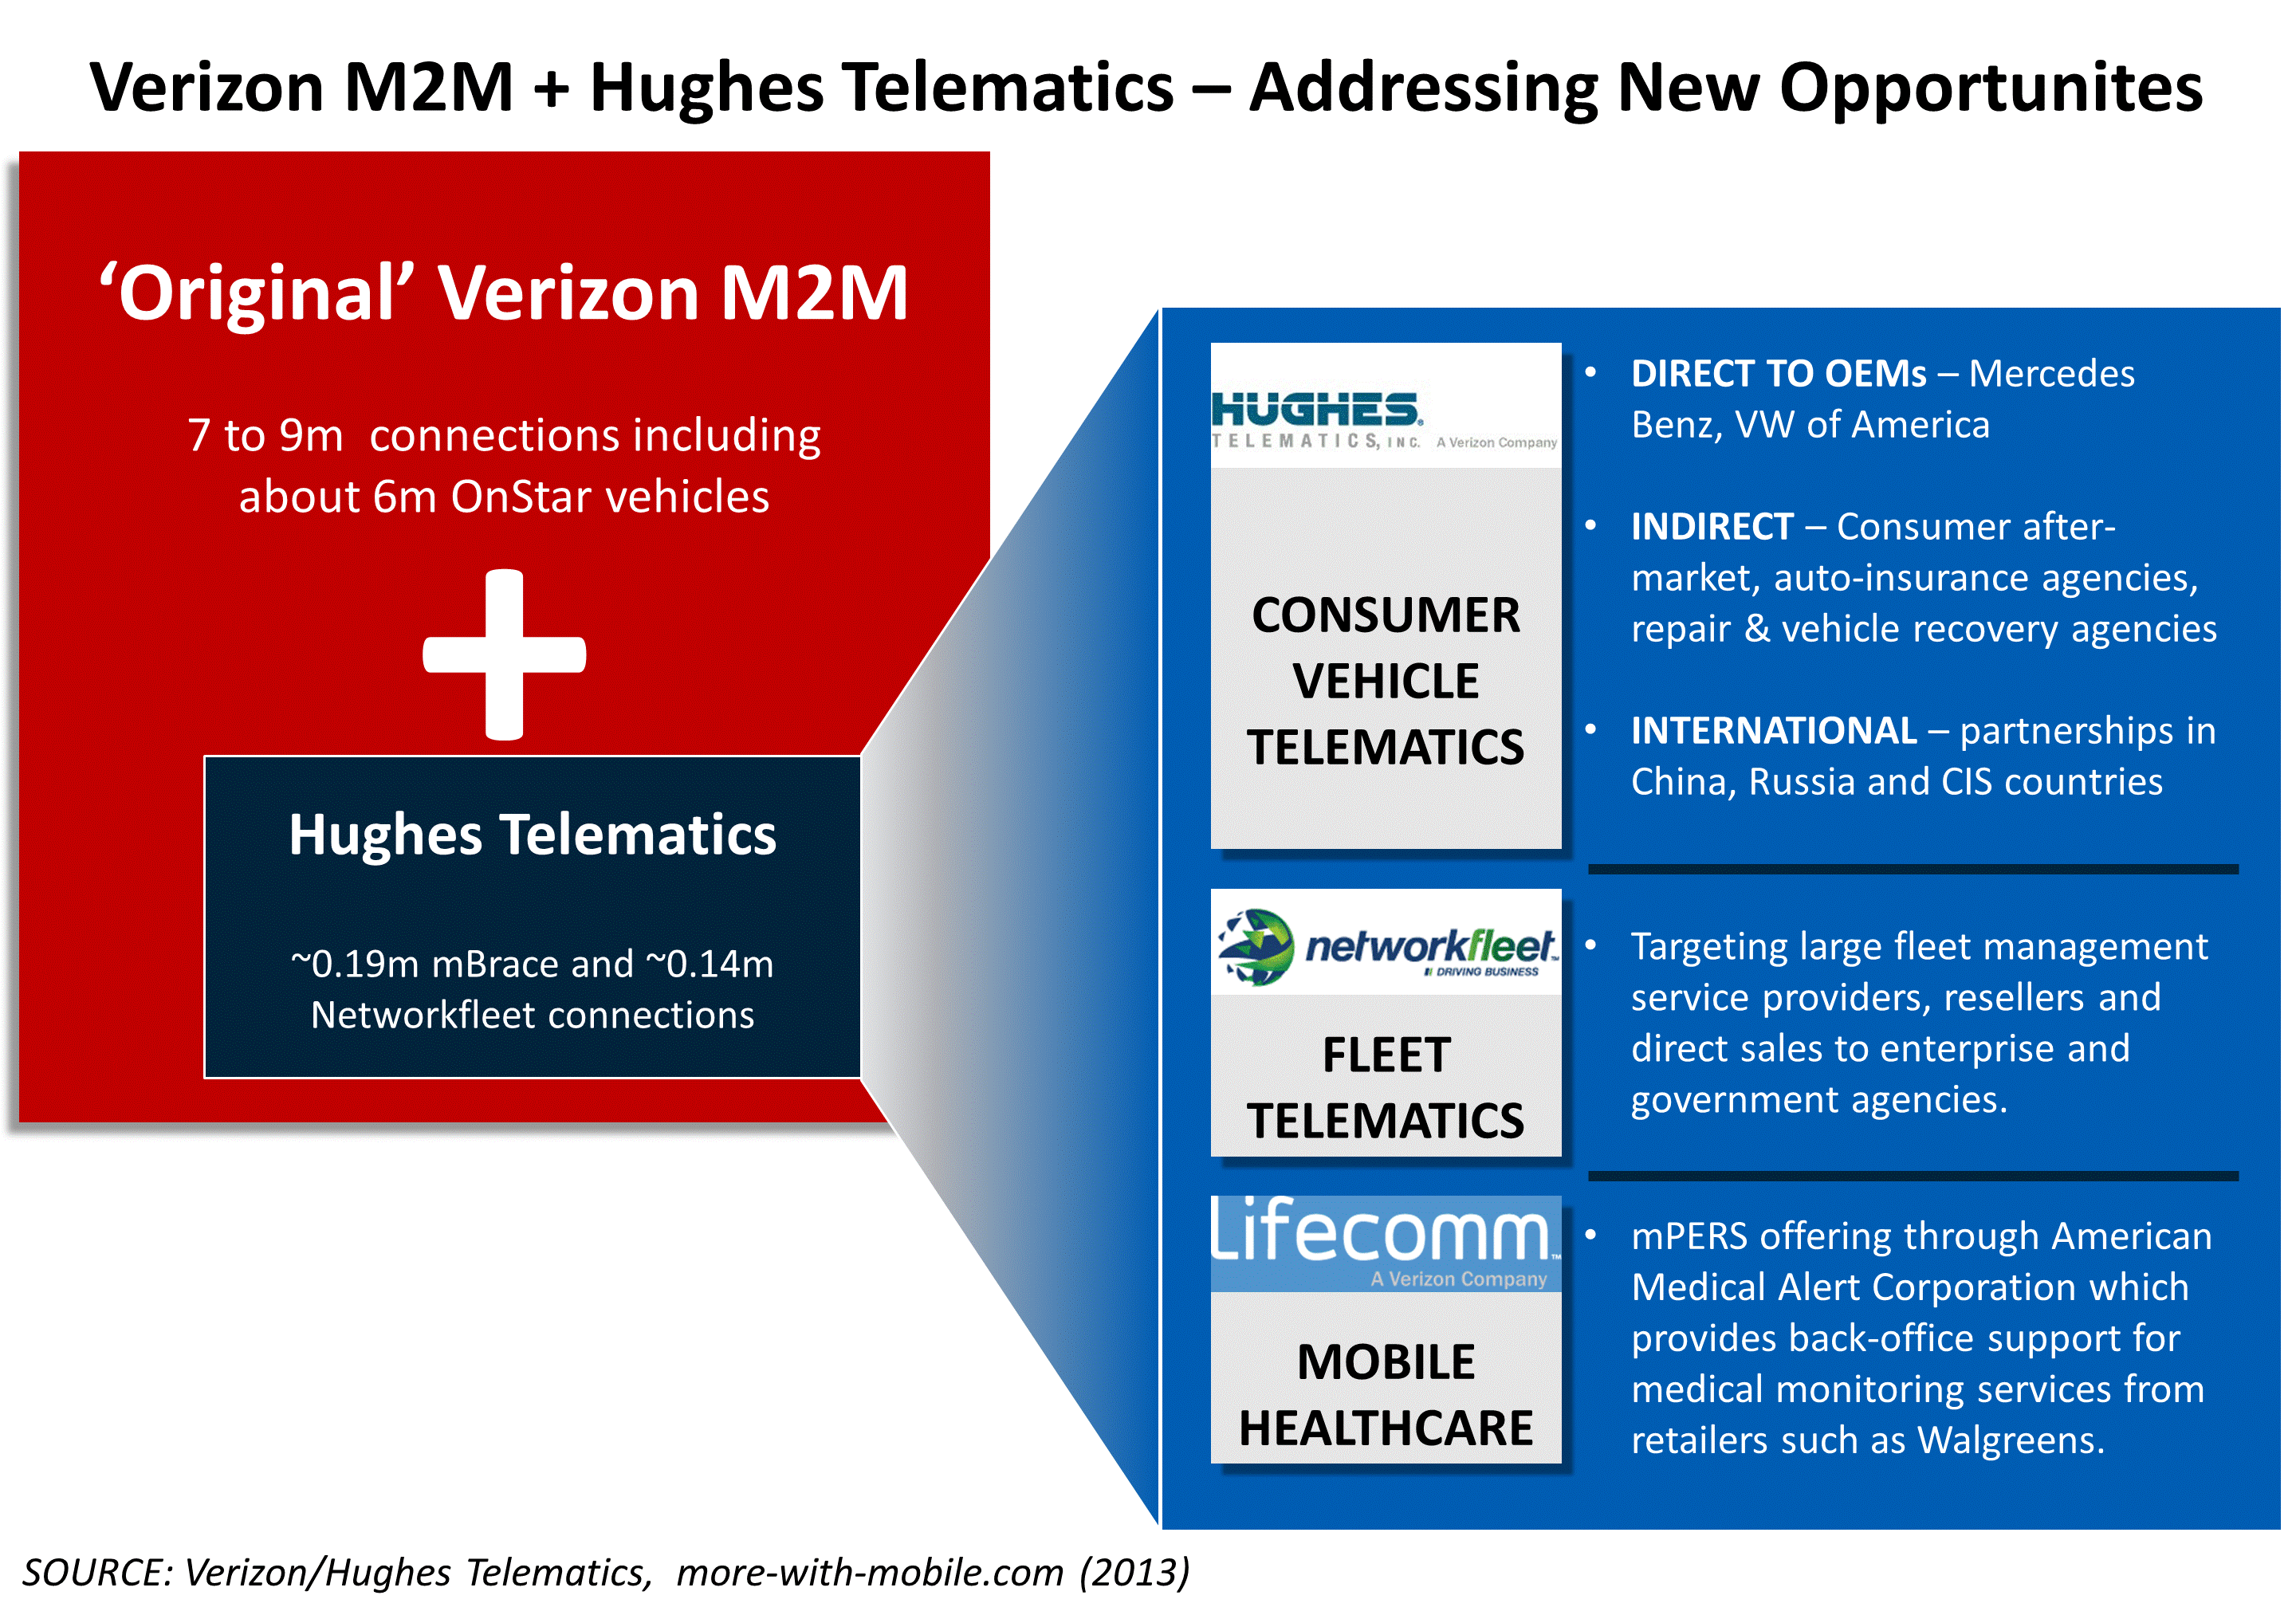 3. Verizon's Enterprise and Small Business Offerings